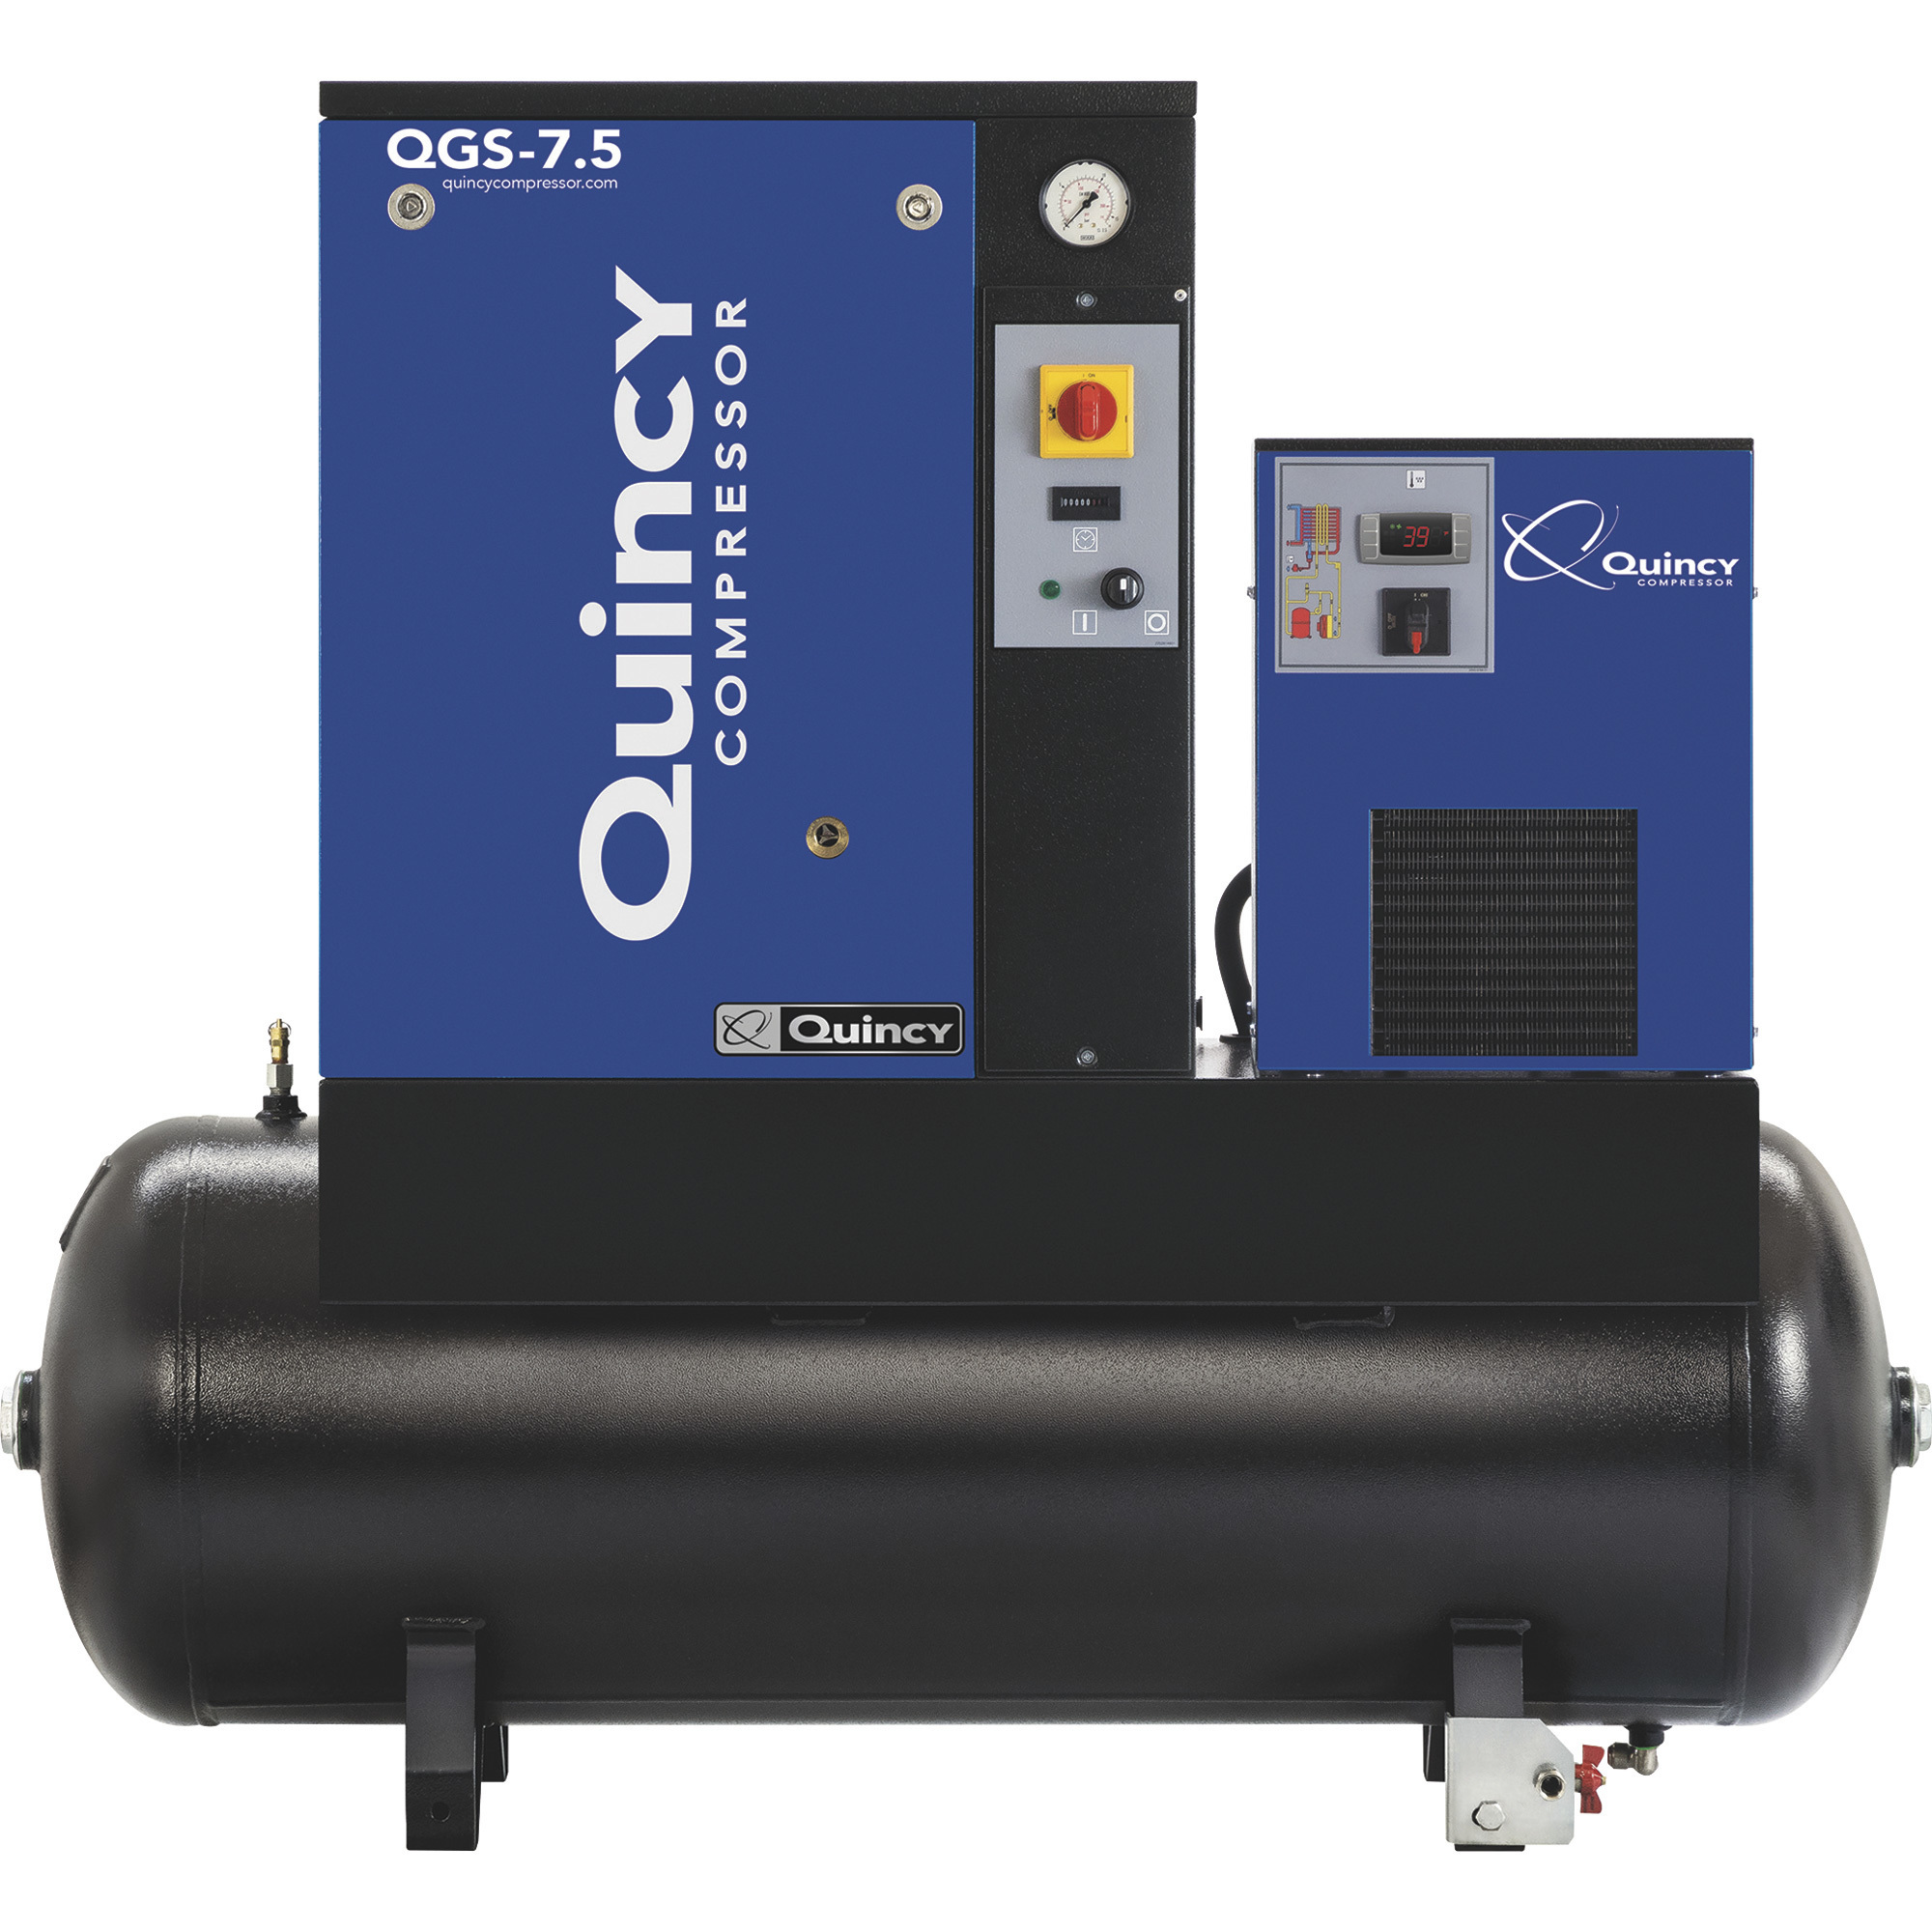 Quincy QGS Rotary Screw Air Compressor with Dryer, 7.5 HP, Tri-Voltage: 200-208V, 230V, 460V, 3-Phase, 60-Gallon Horizontal, Model 4152051917